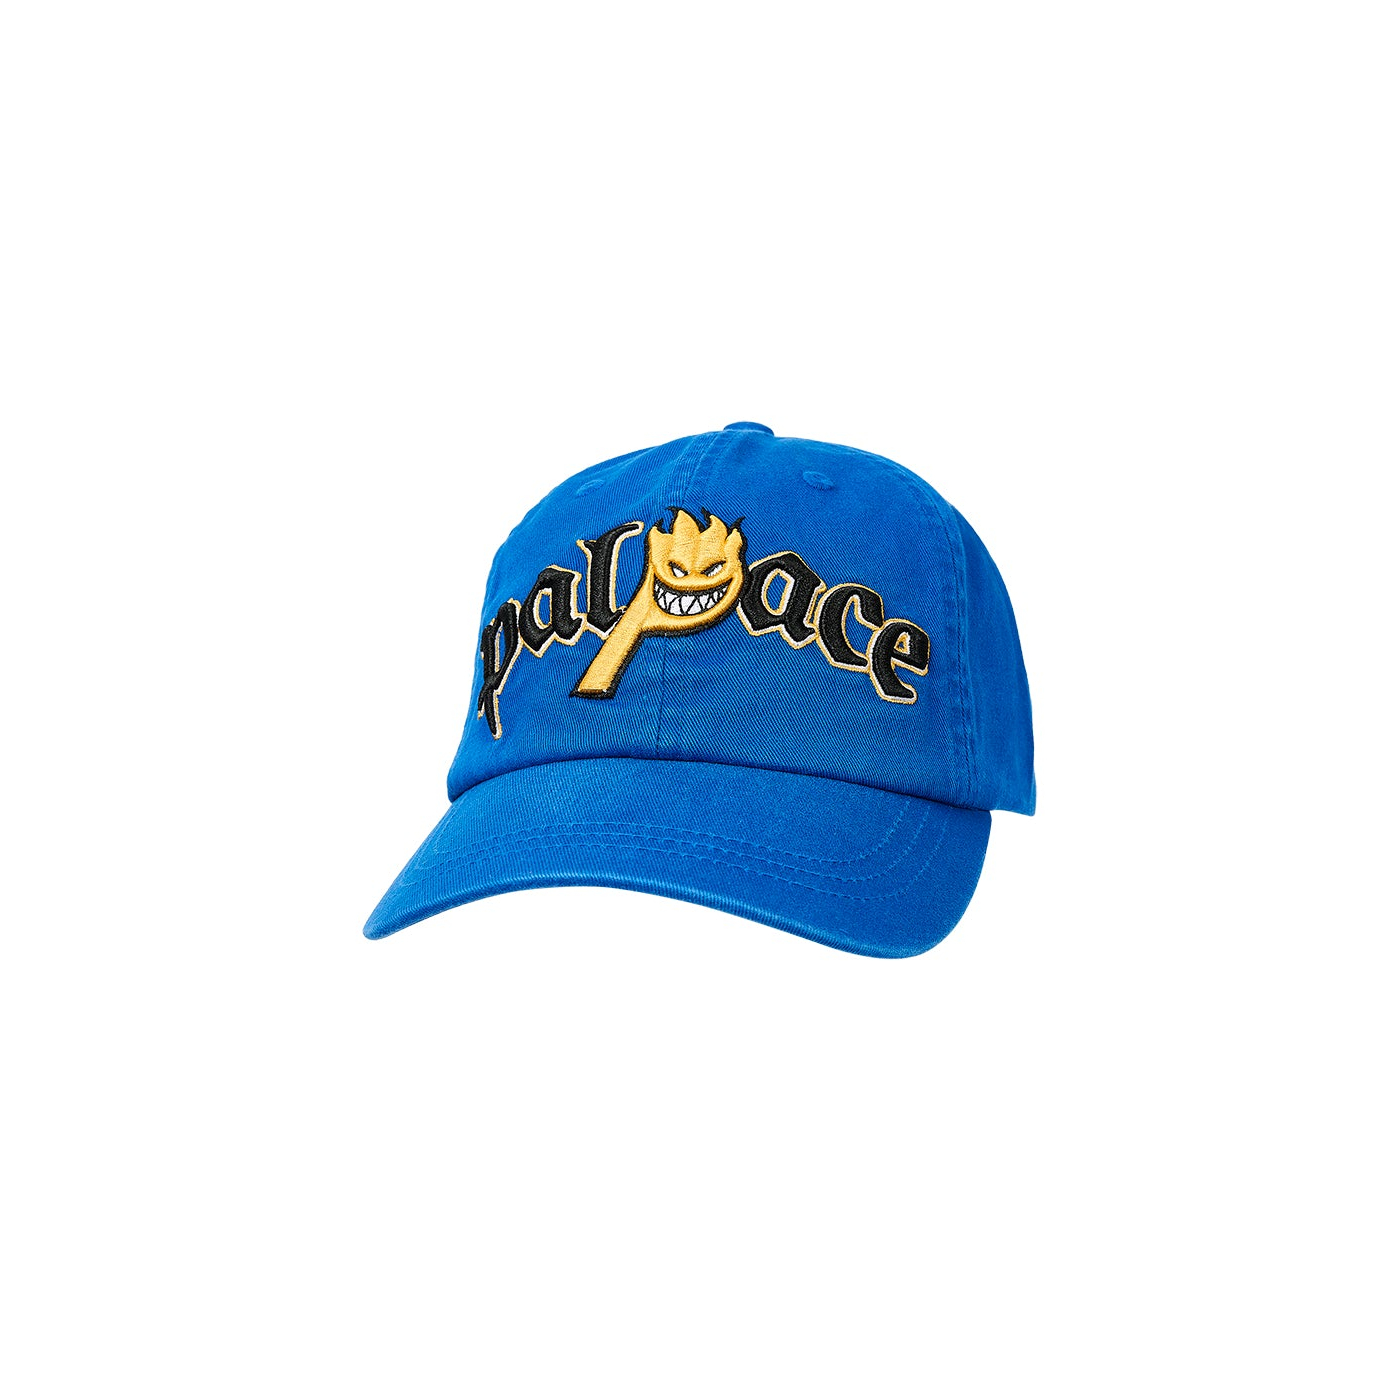 Thumbnail PALACE SPITFIRE 6-PANEL BLUE one color